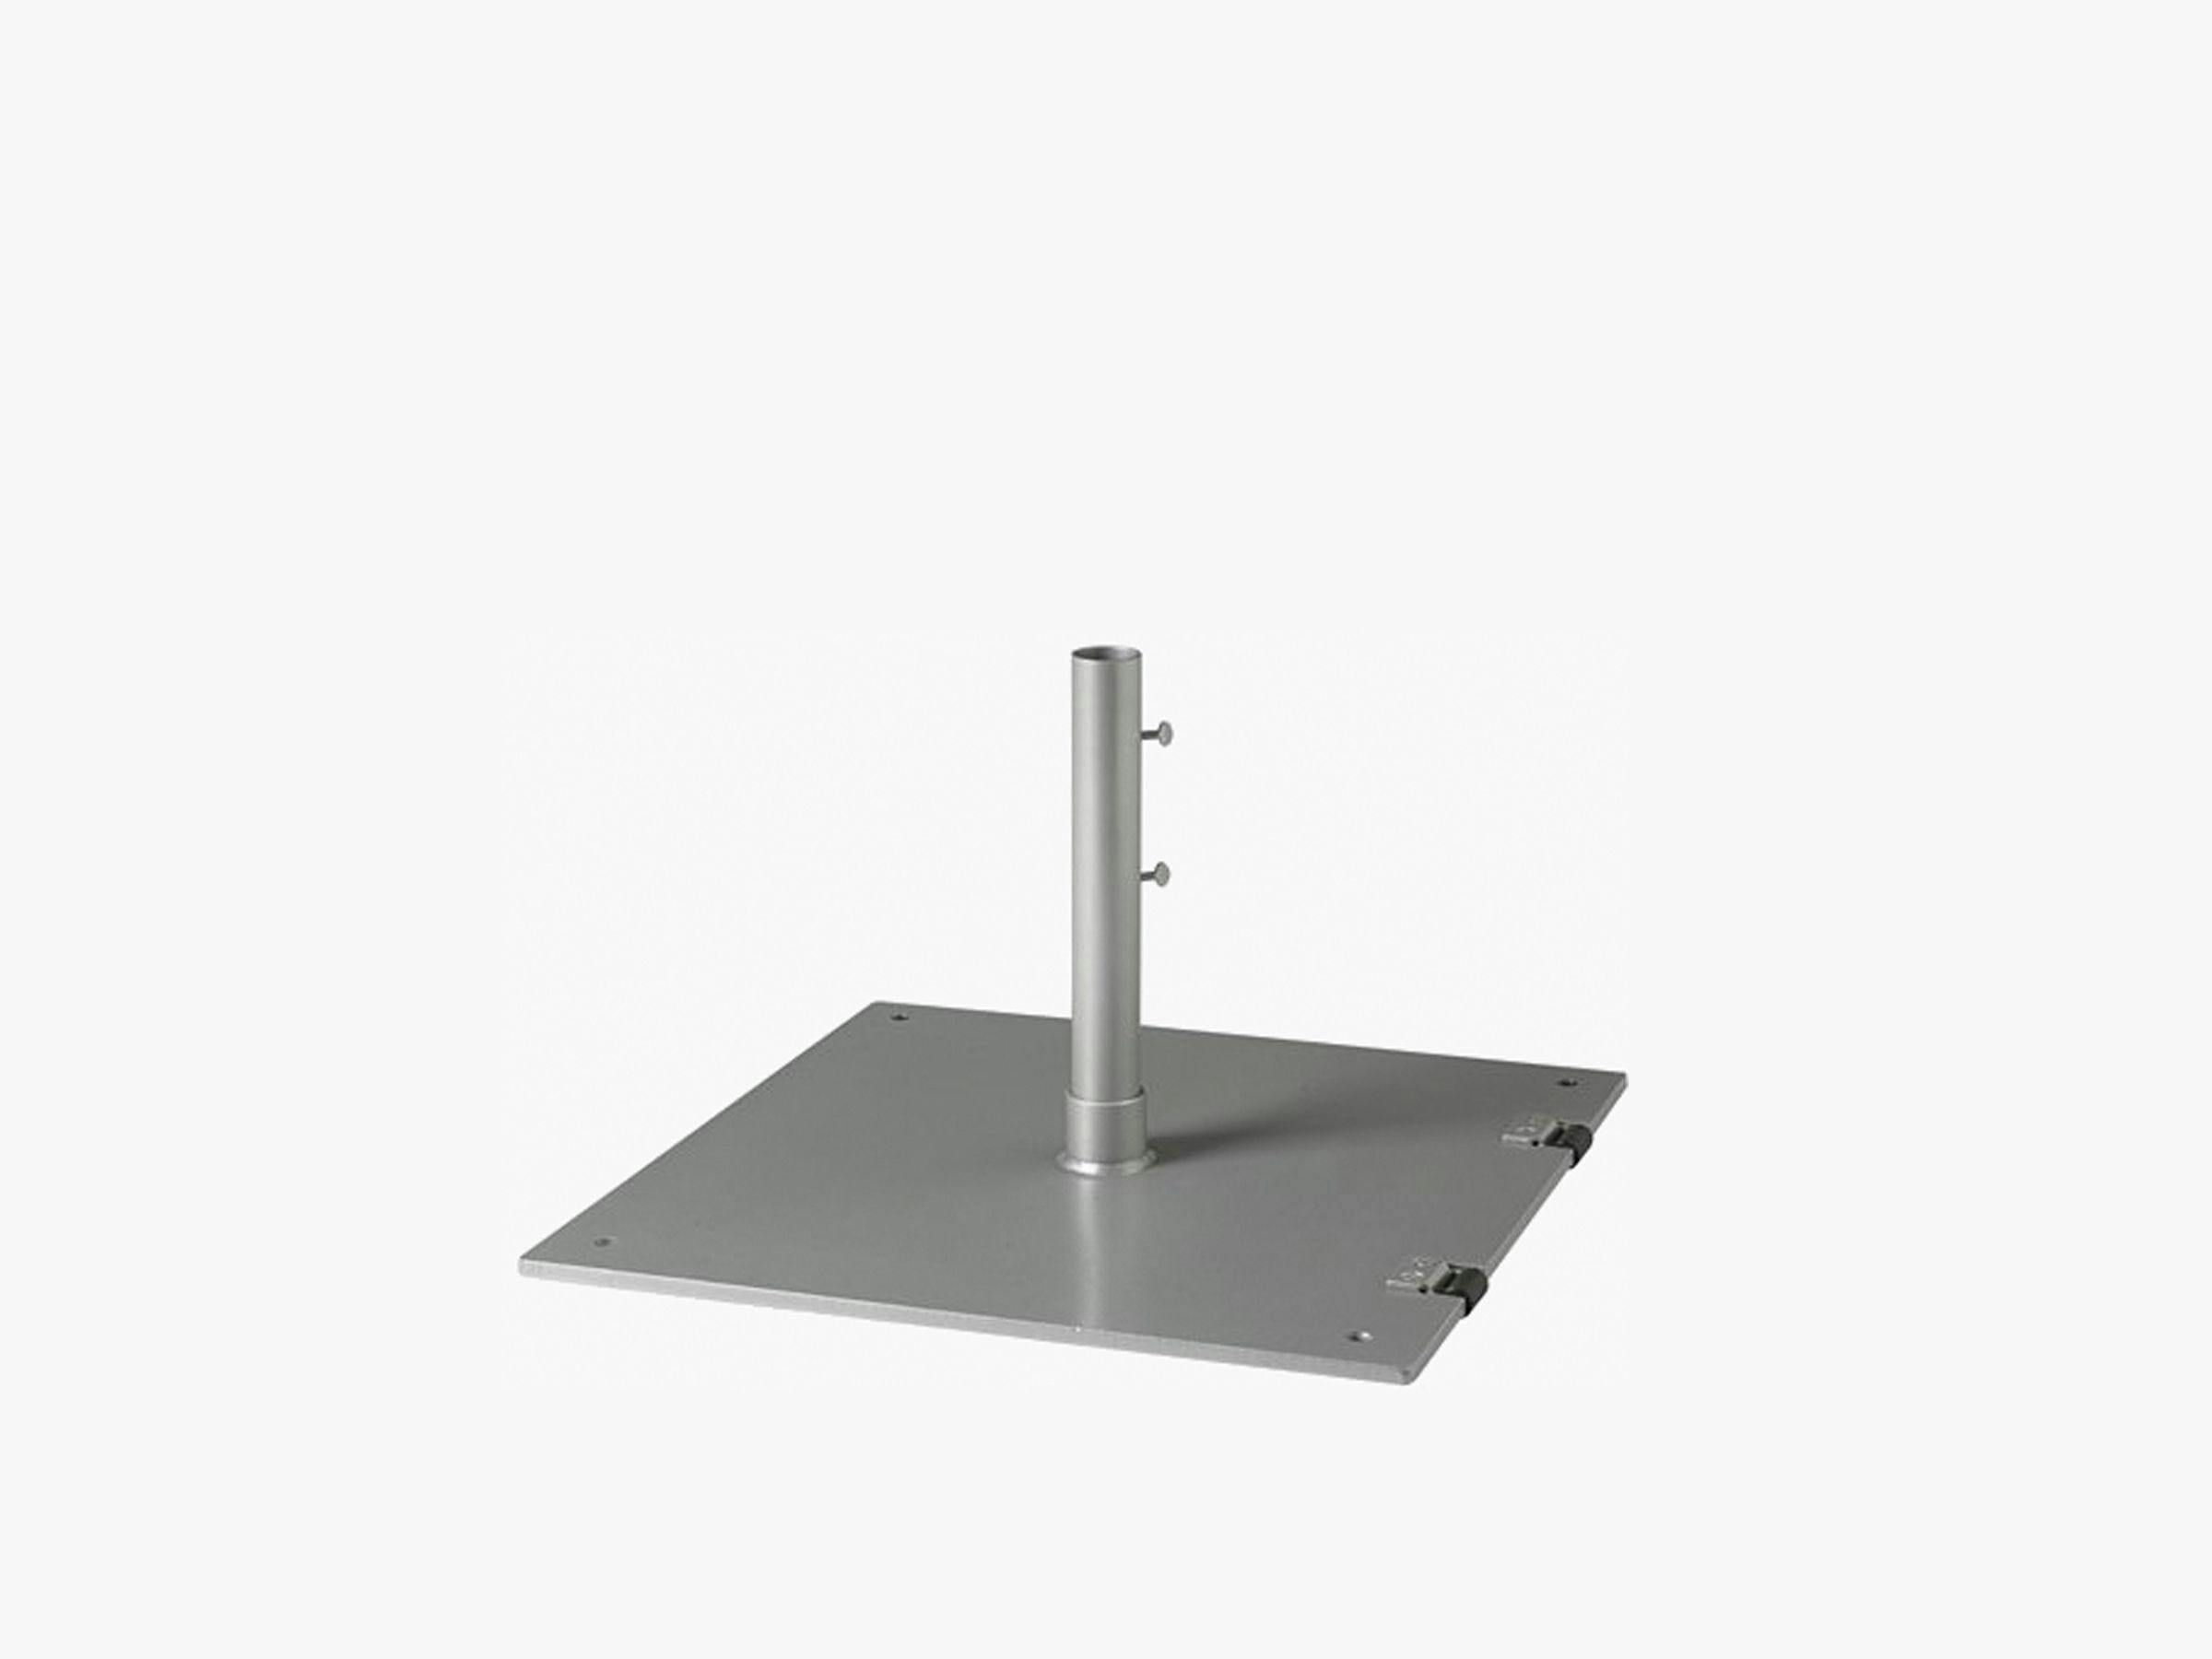 Steel Plate Base, 24" Square - Fits 1.5" Pole, Freestanding